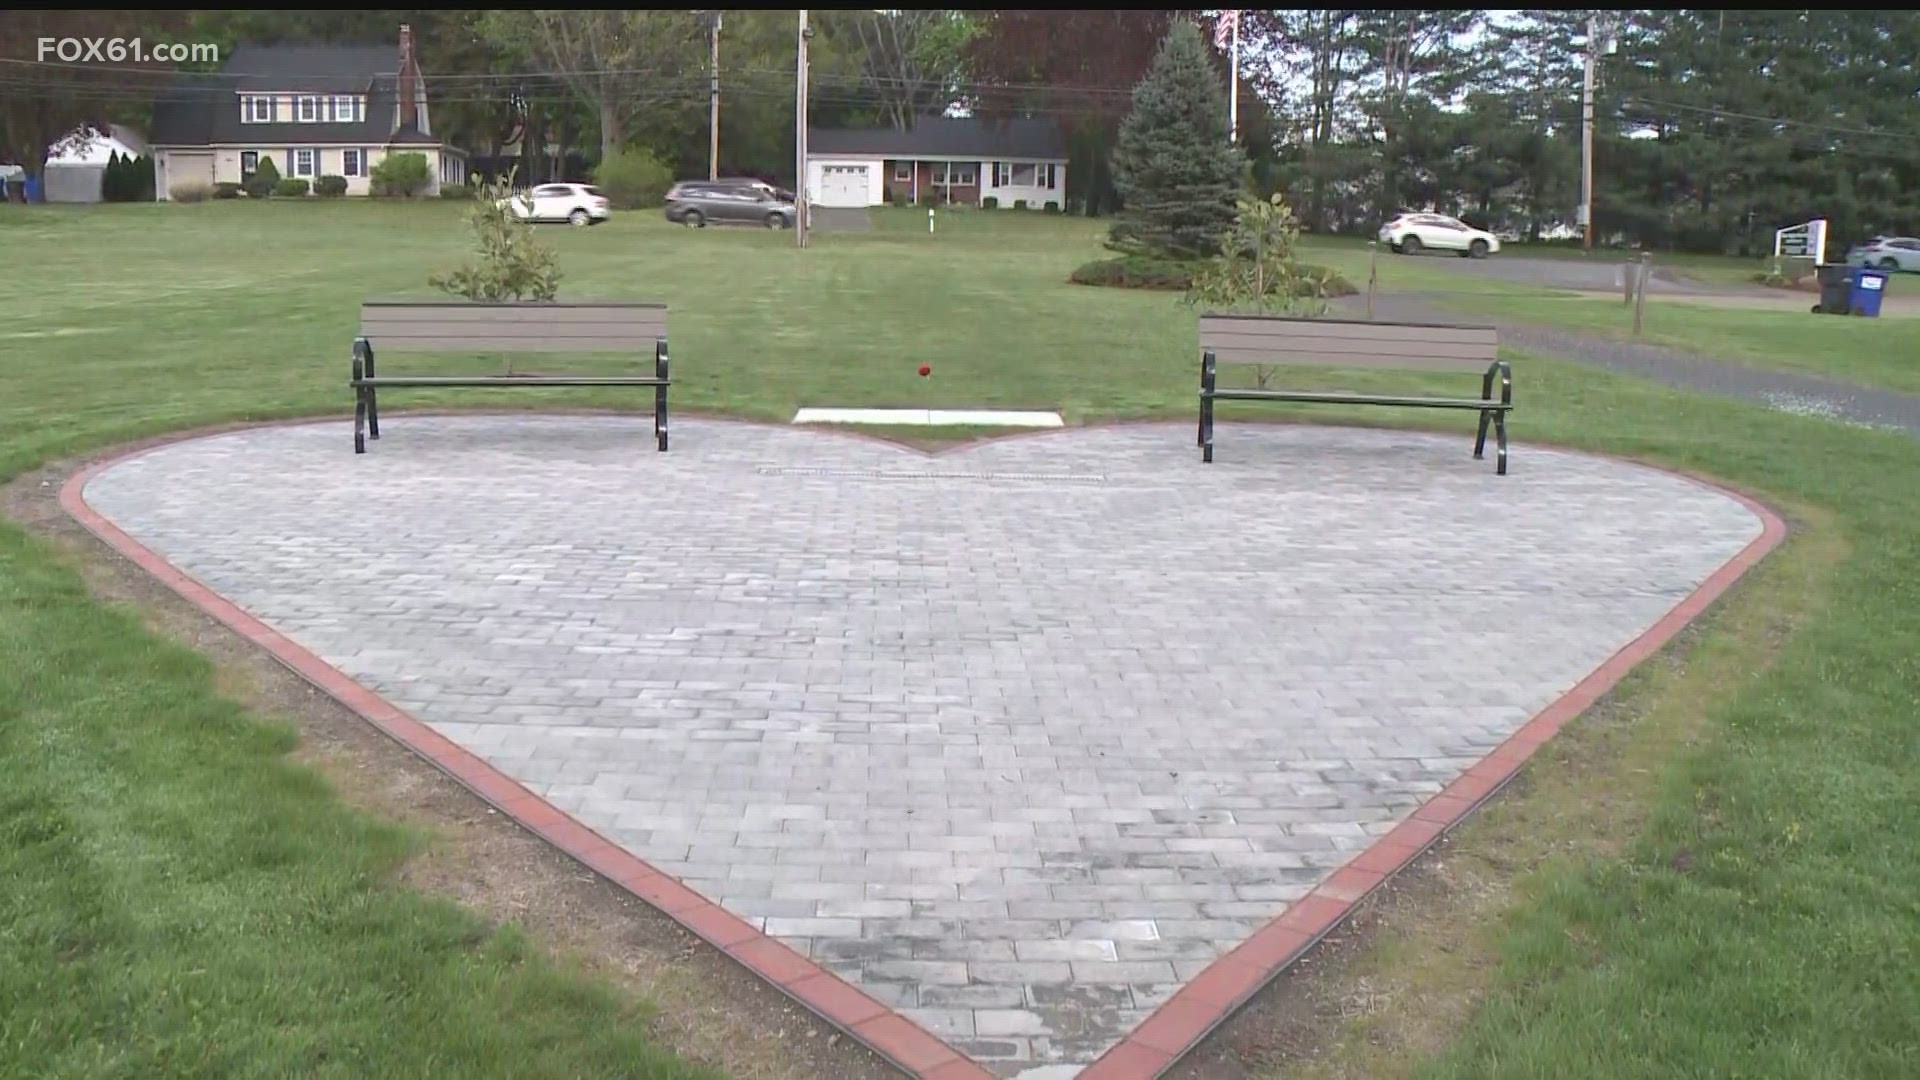 The town of South Windsor now has a memorial dedicated to those who lost their lives due to COVID-19.